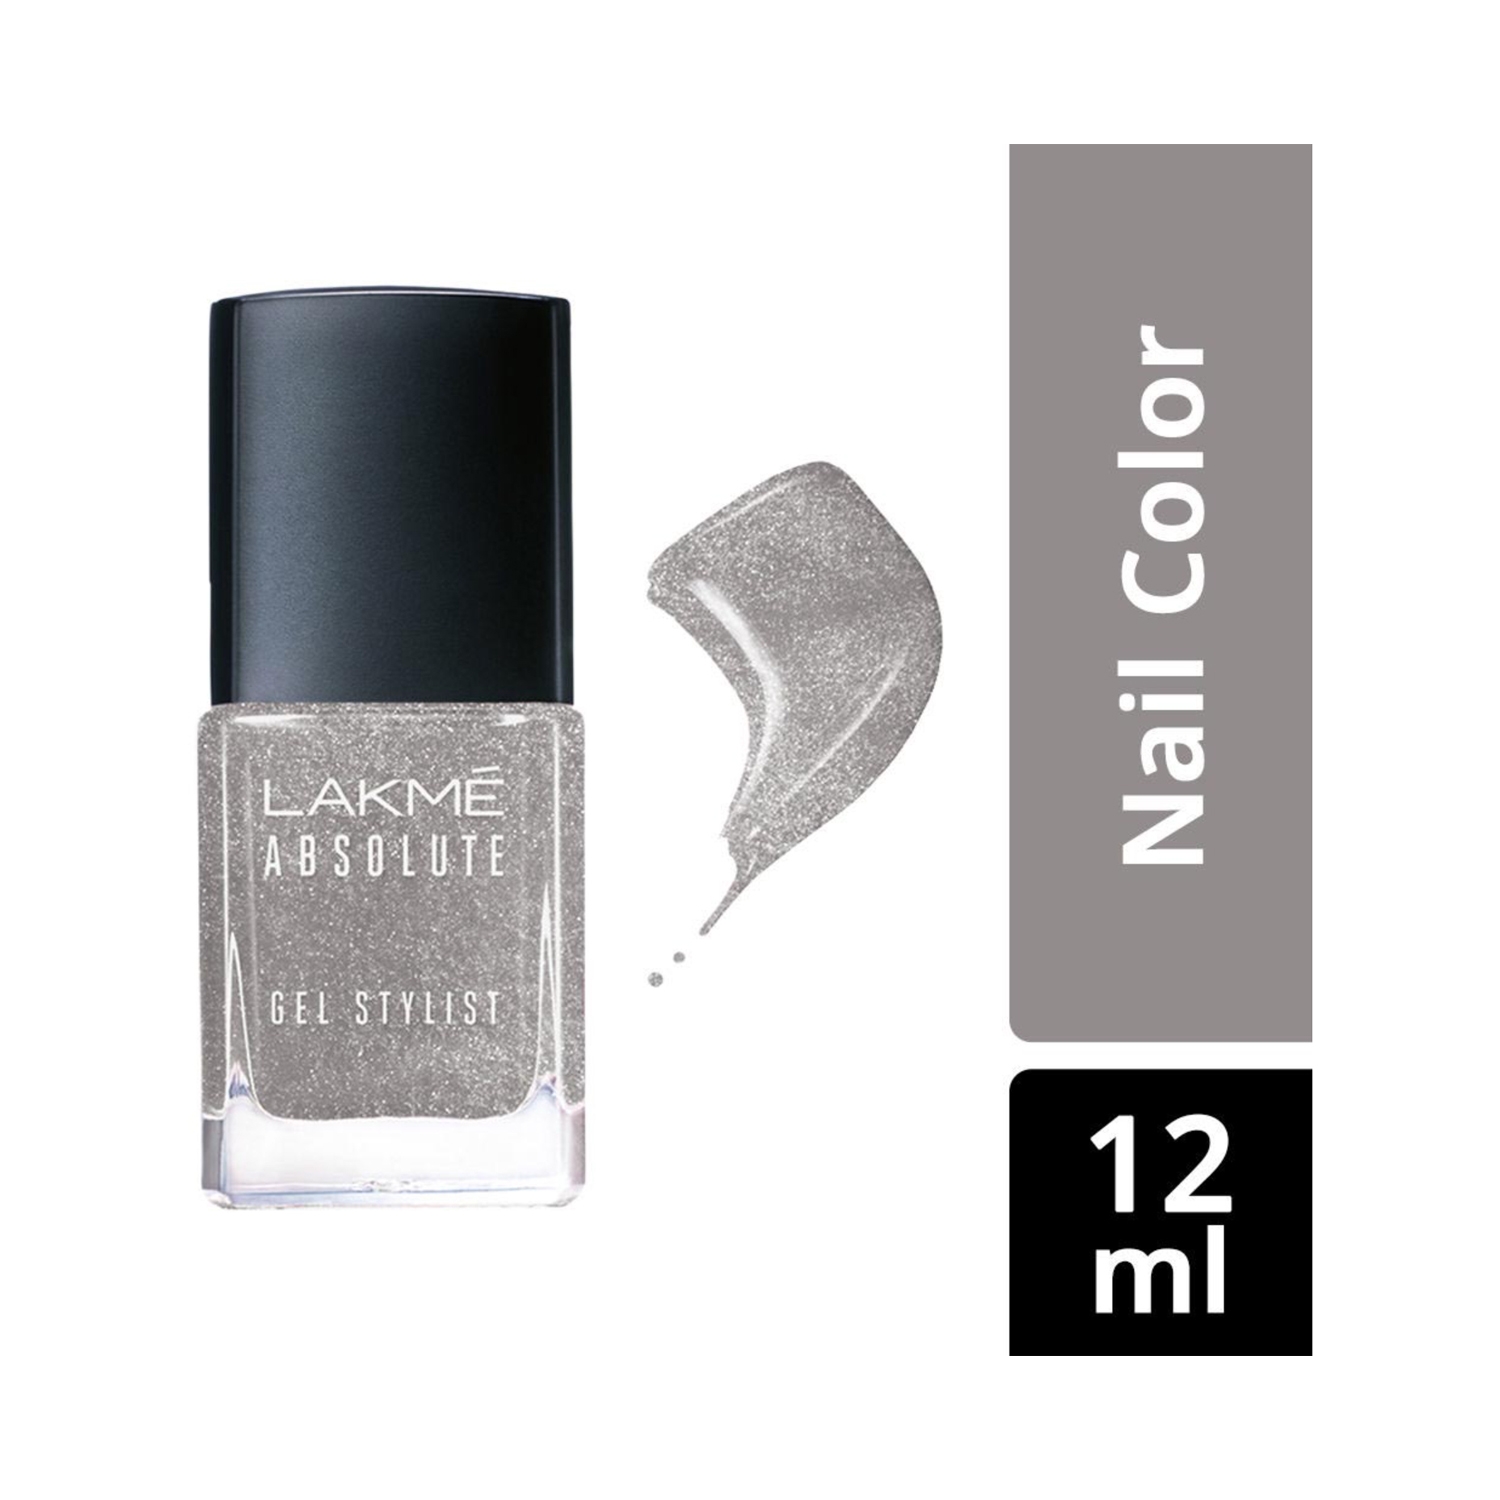 Lakme Absolute Gel Stylist Nail Color - Diva (12ml)